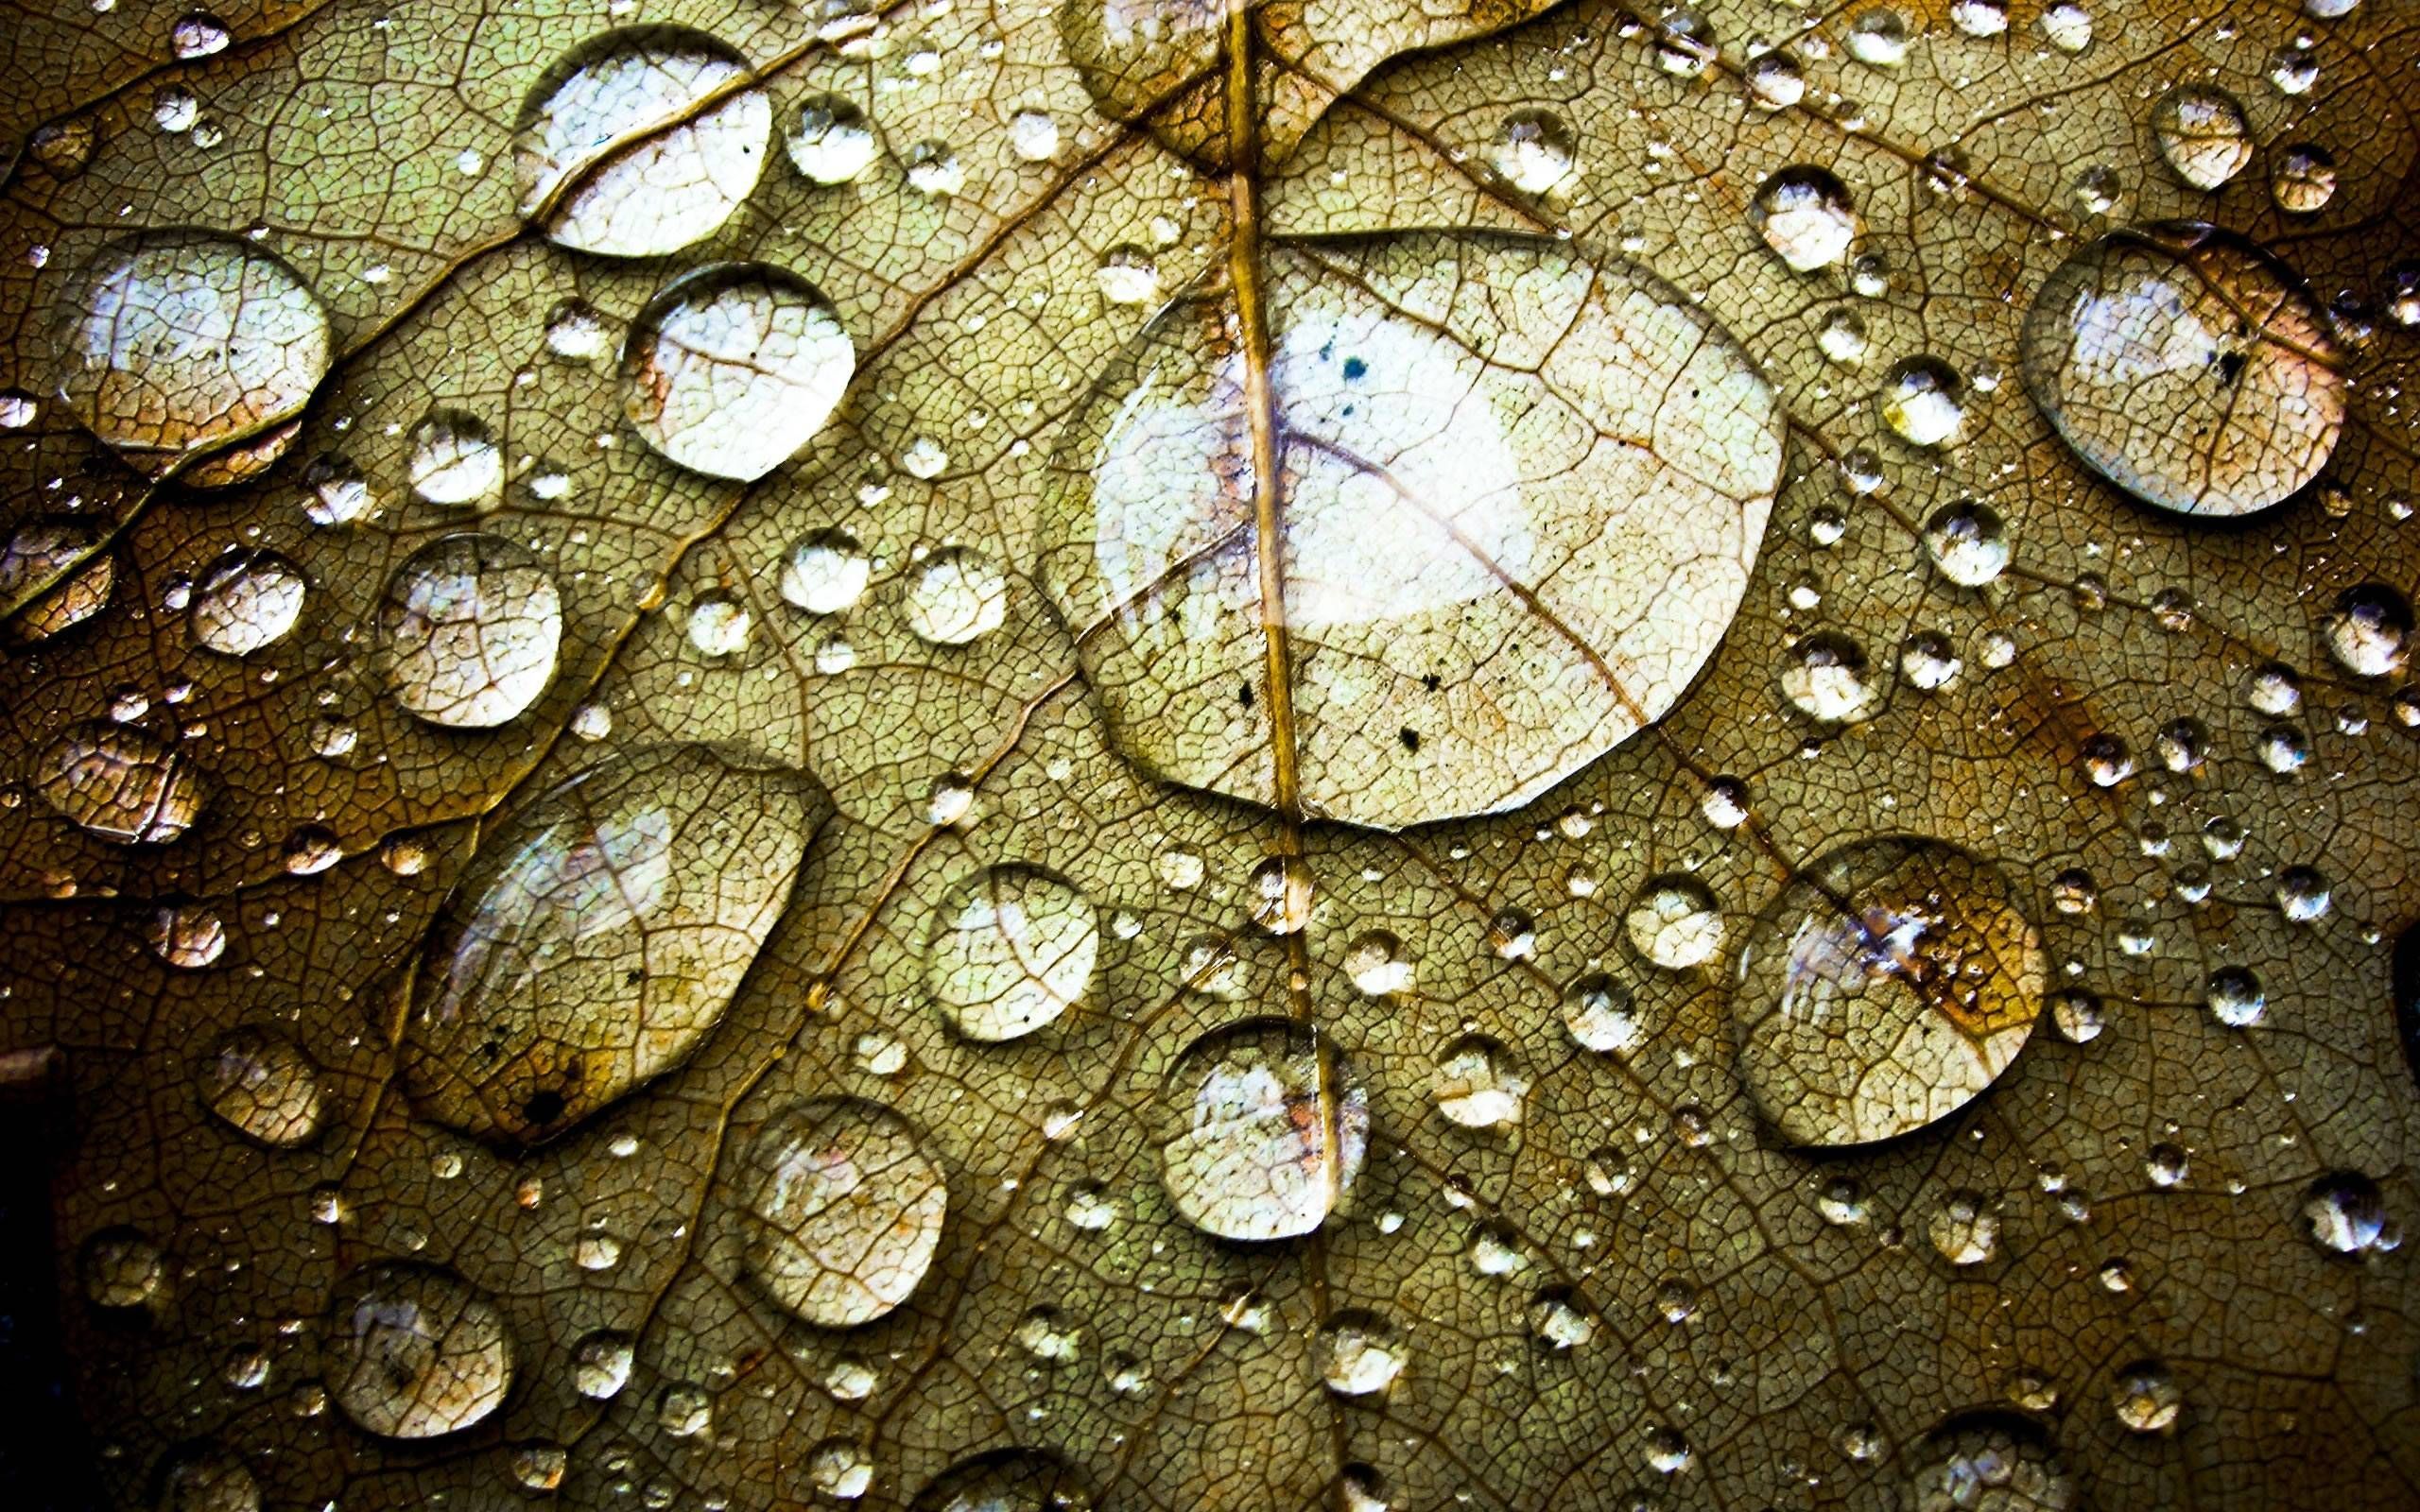 Water Drop On Leaf Wallpaper High Quality with HD Deskx1600 px 786.06 KB. Water drop on leaf, Water drops, Wallpaper pc